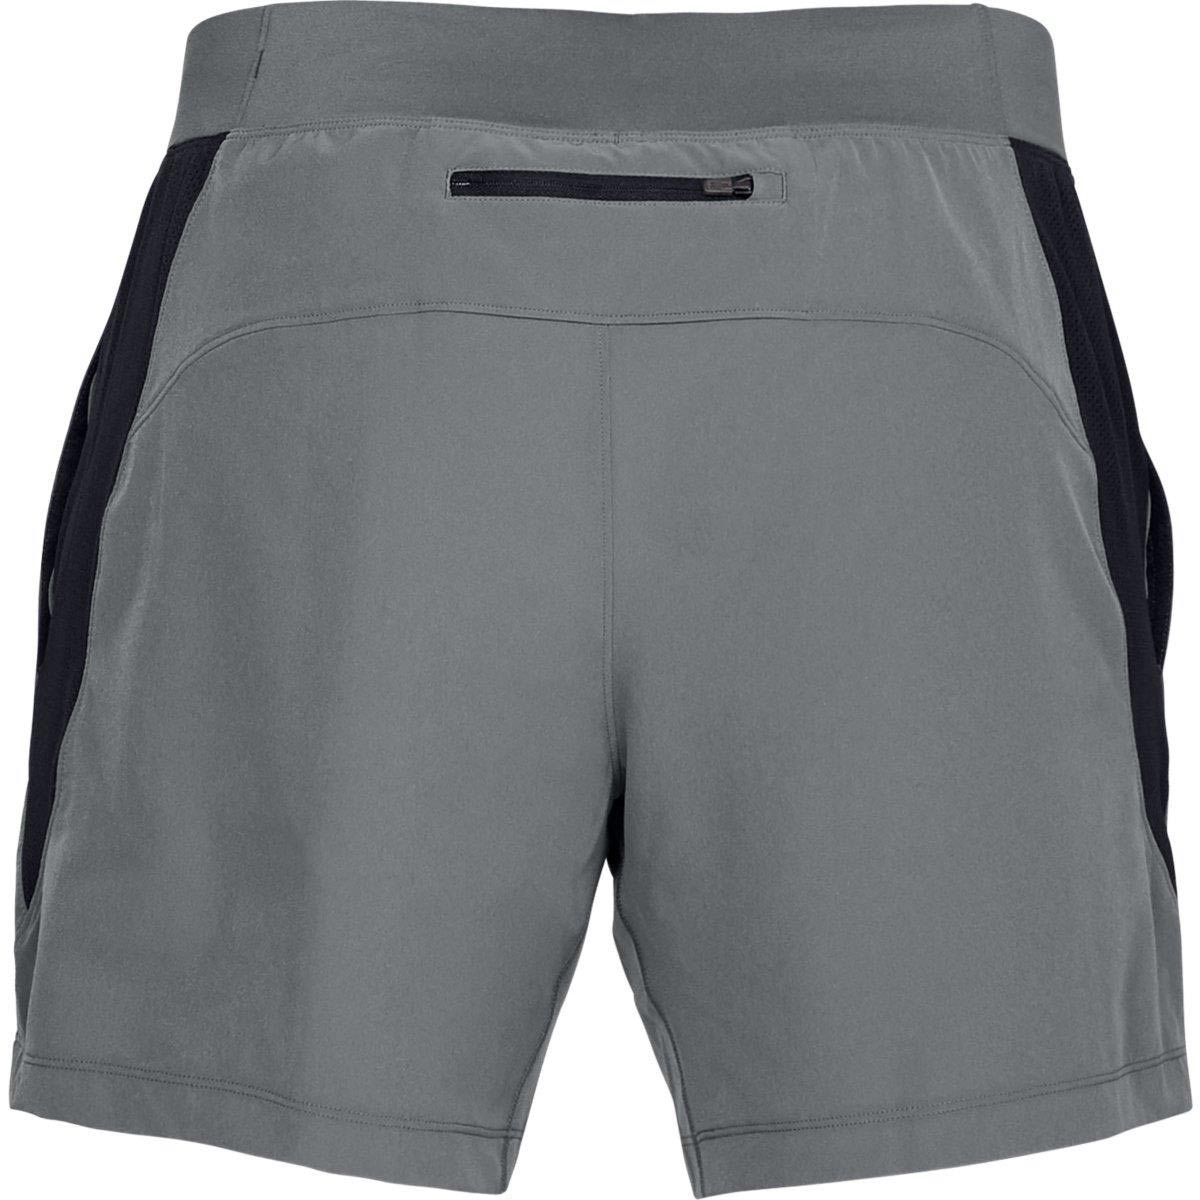 operation success Miraculous Shorts | Clothing | Under armour UA Qualifier Speedpocket 2in1 Shorts 6601  | Fitness